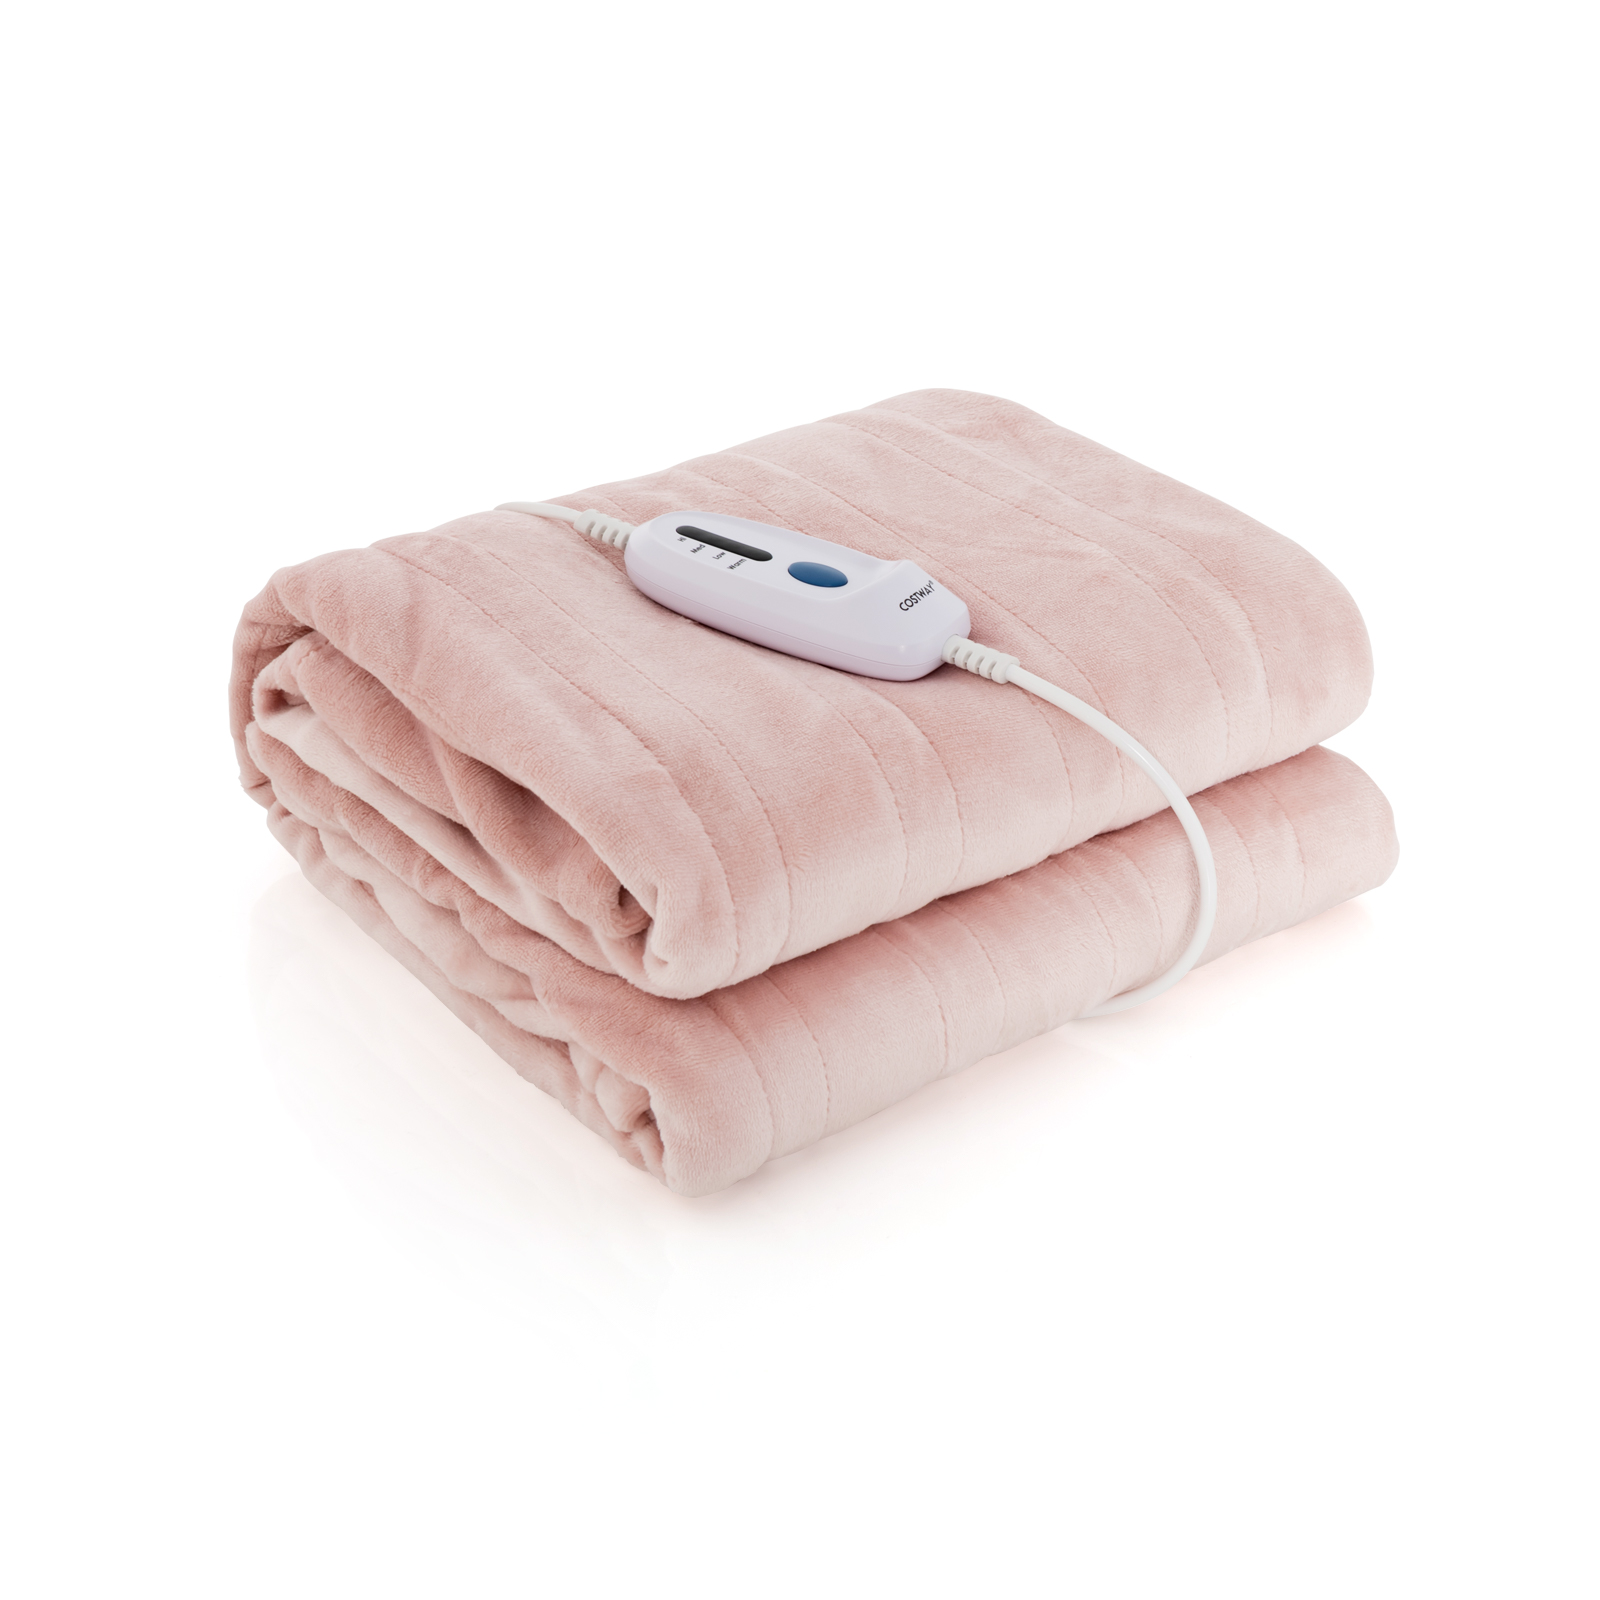 150 x 200 cm Electric Heated Blanket with 4 Heating Levels-Pink